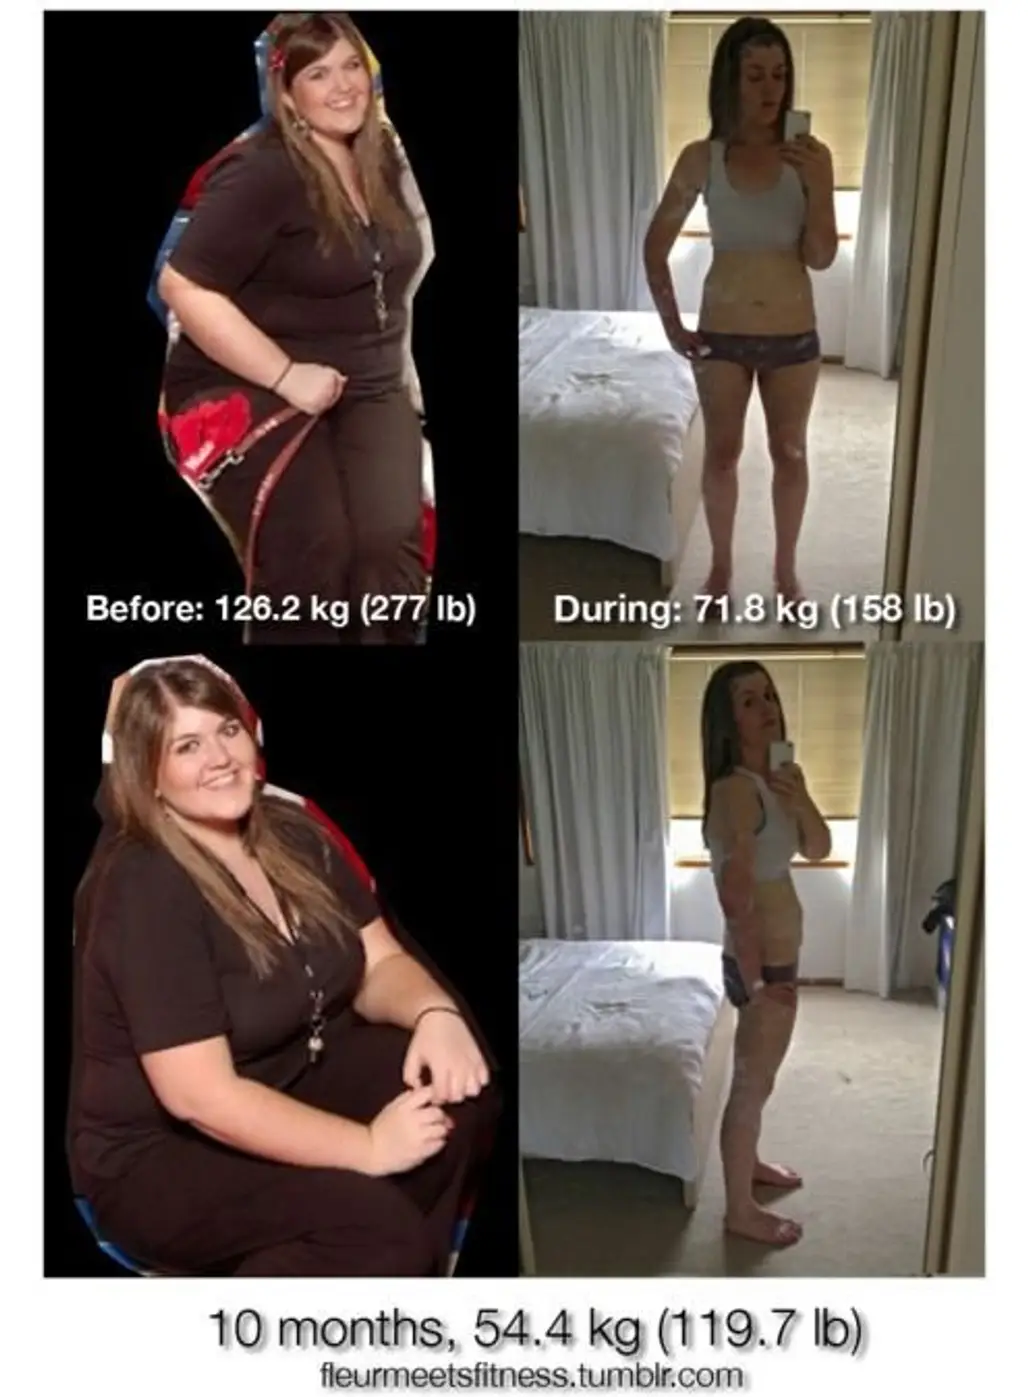 A Story of Weight Loss Glory